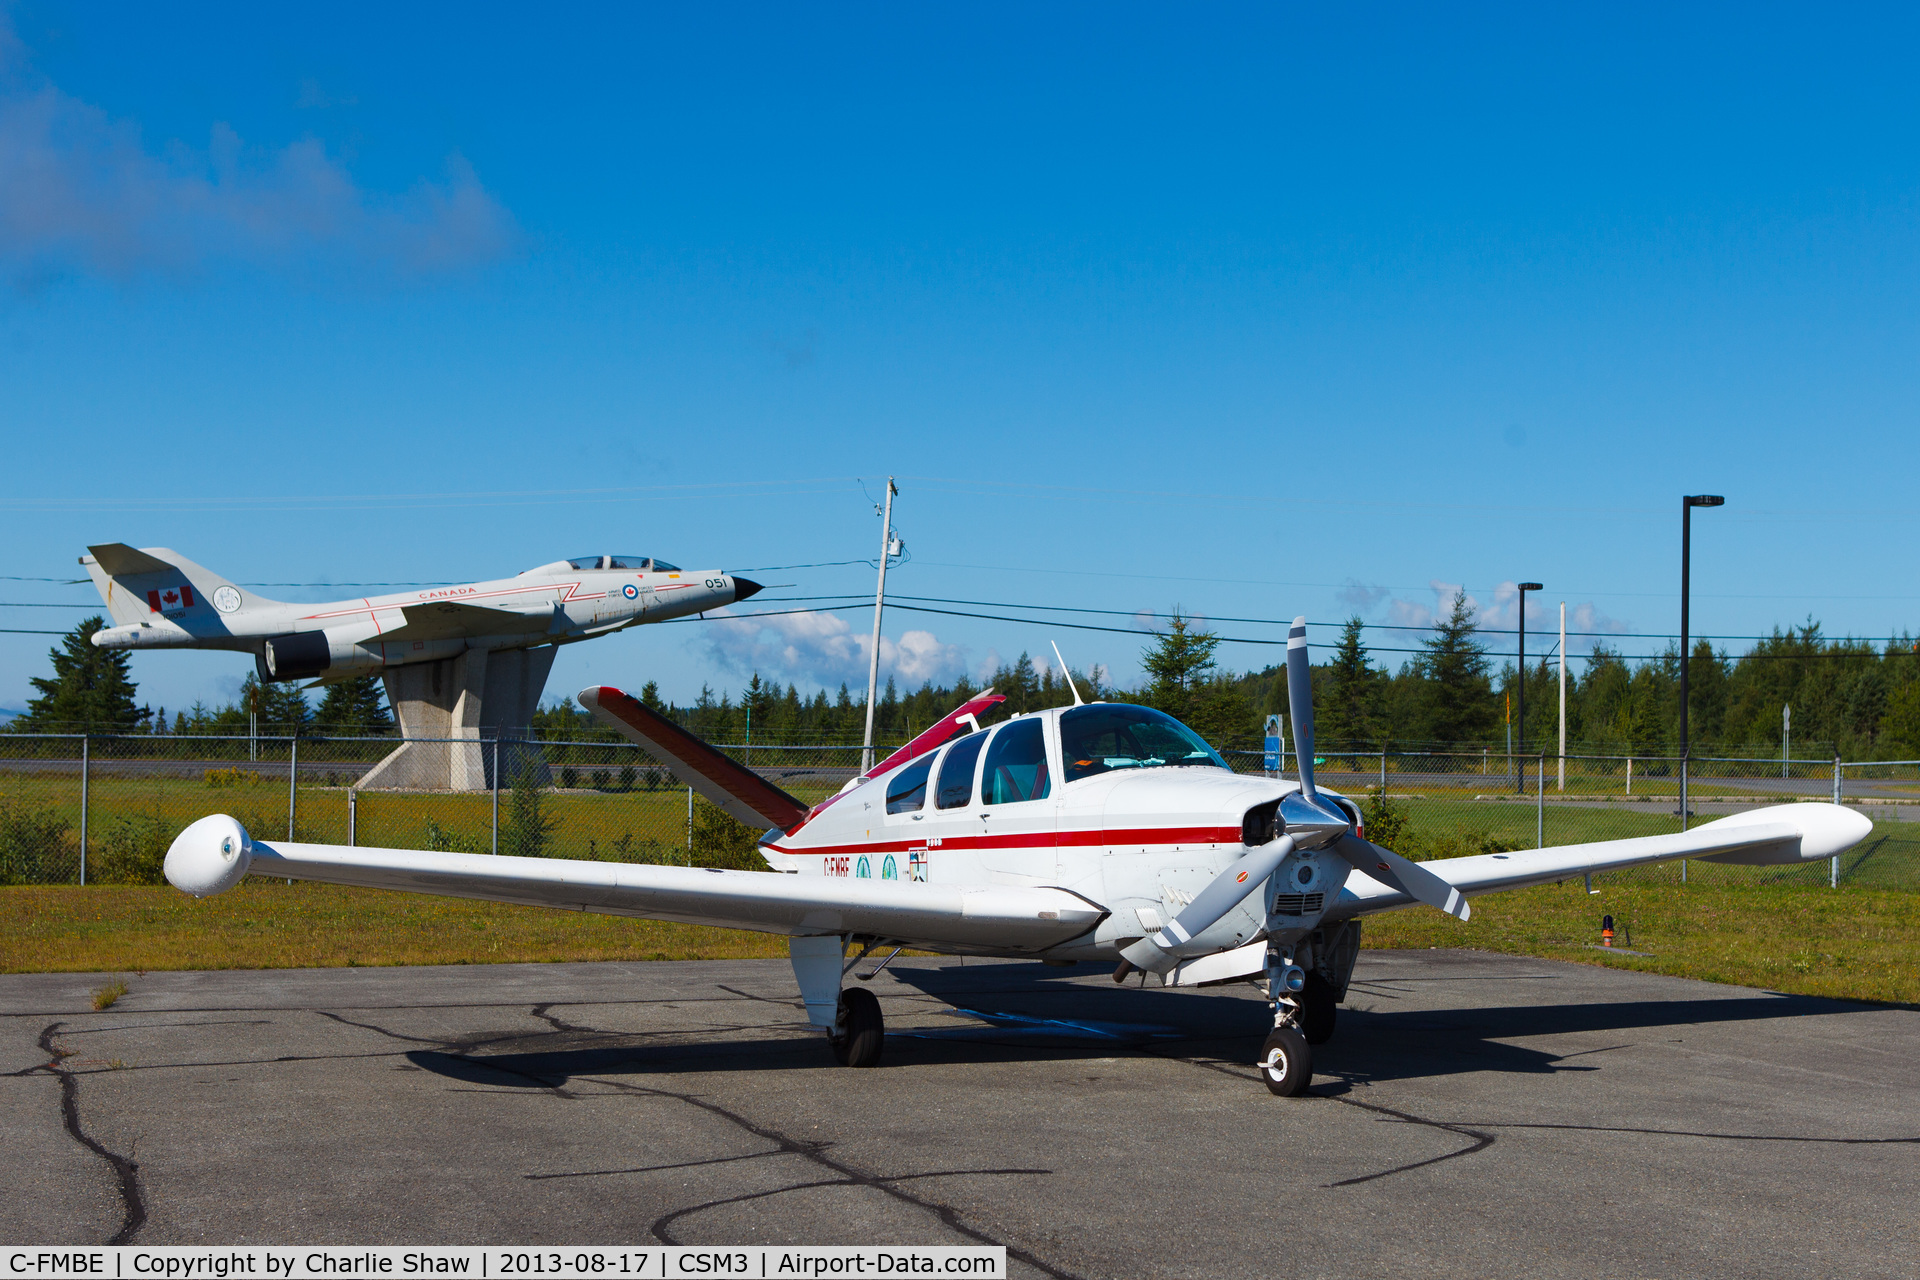 C-FMBE, 1964 Beech S35 Bonanza Bonanza C/N D-7361, Parked on the apron at Thetford Mines airport.